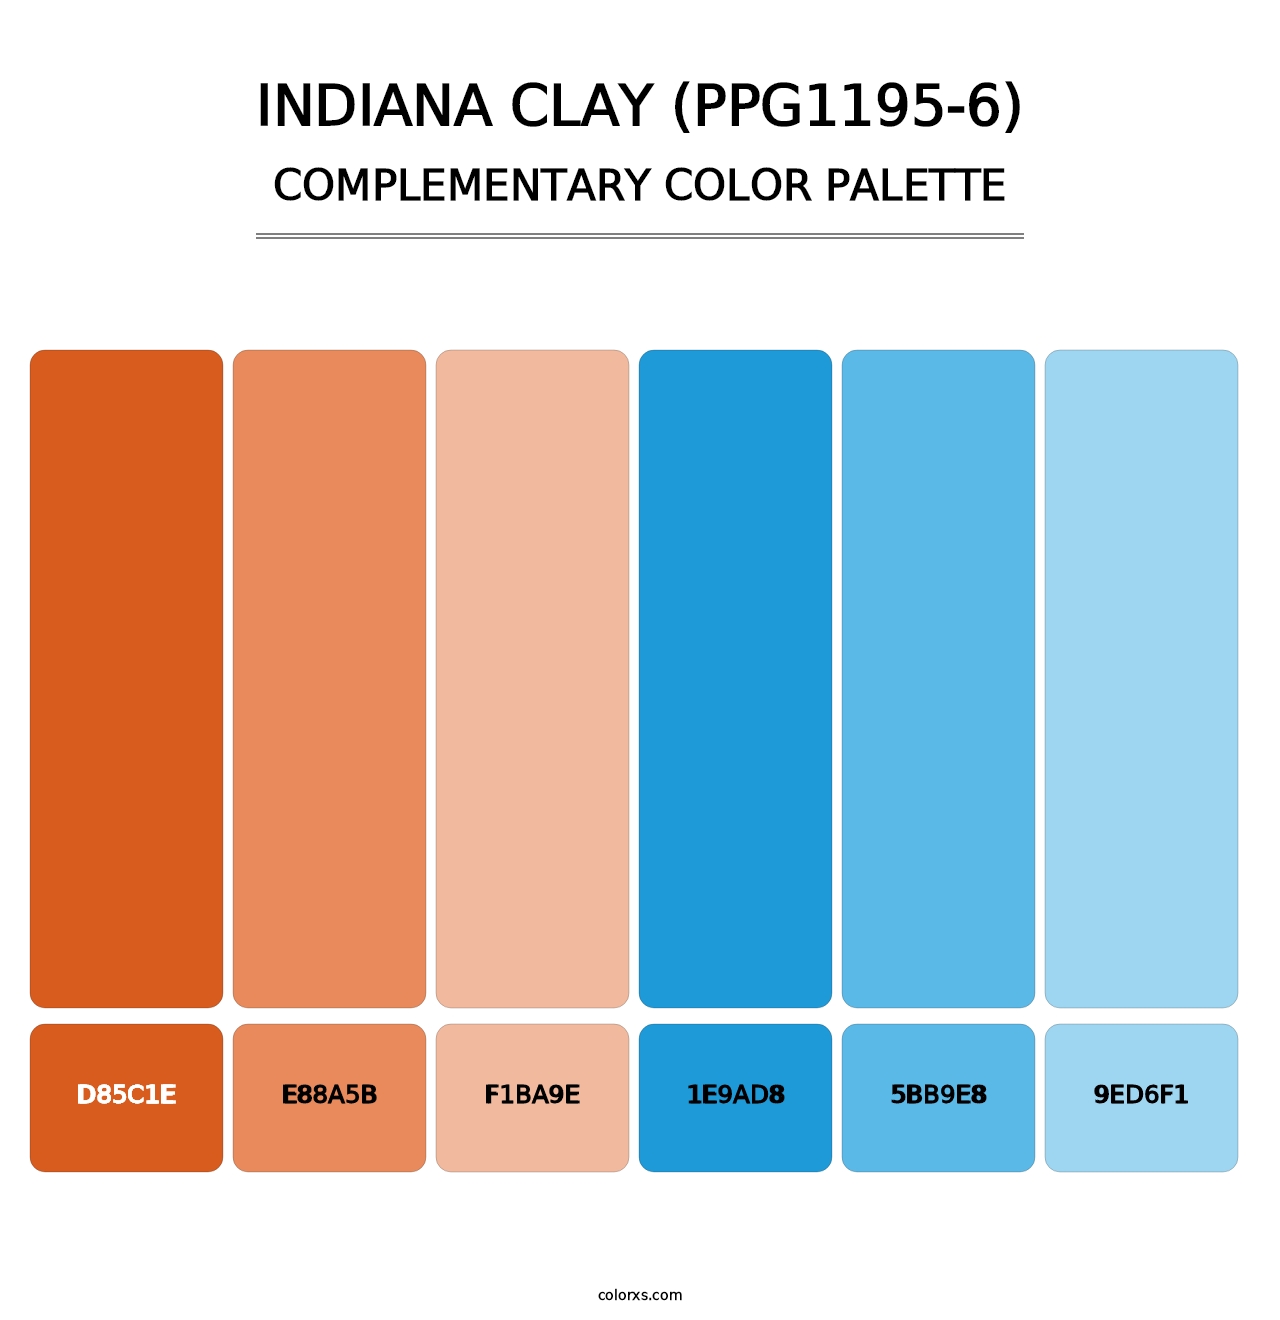 Indiana Clay (PPG1195-6) - Complementary Color Palette